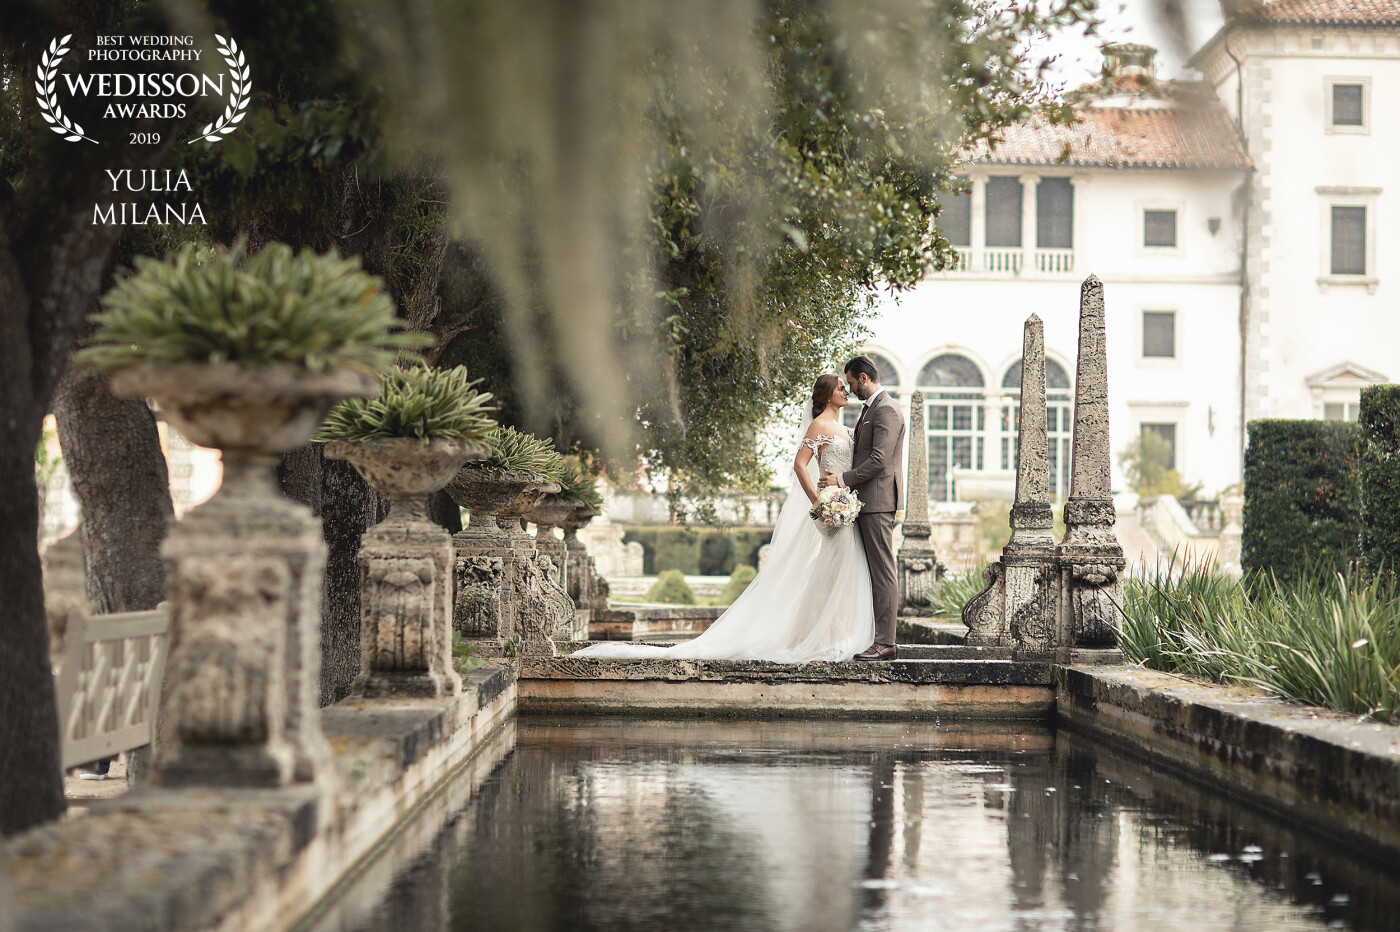 This photo was taken at the beautiful Villa Vizcaya in Miami, Florida. It was raining that day but I think the rain made it even more romantic and beautiful.